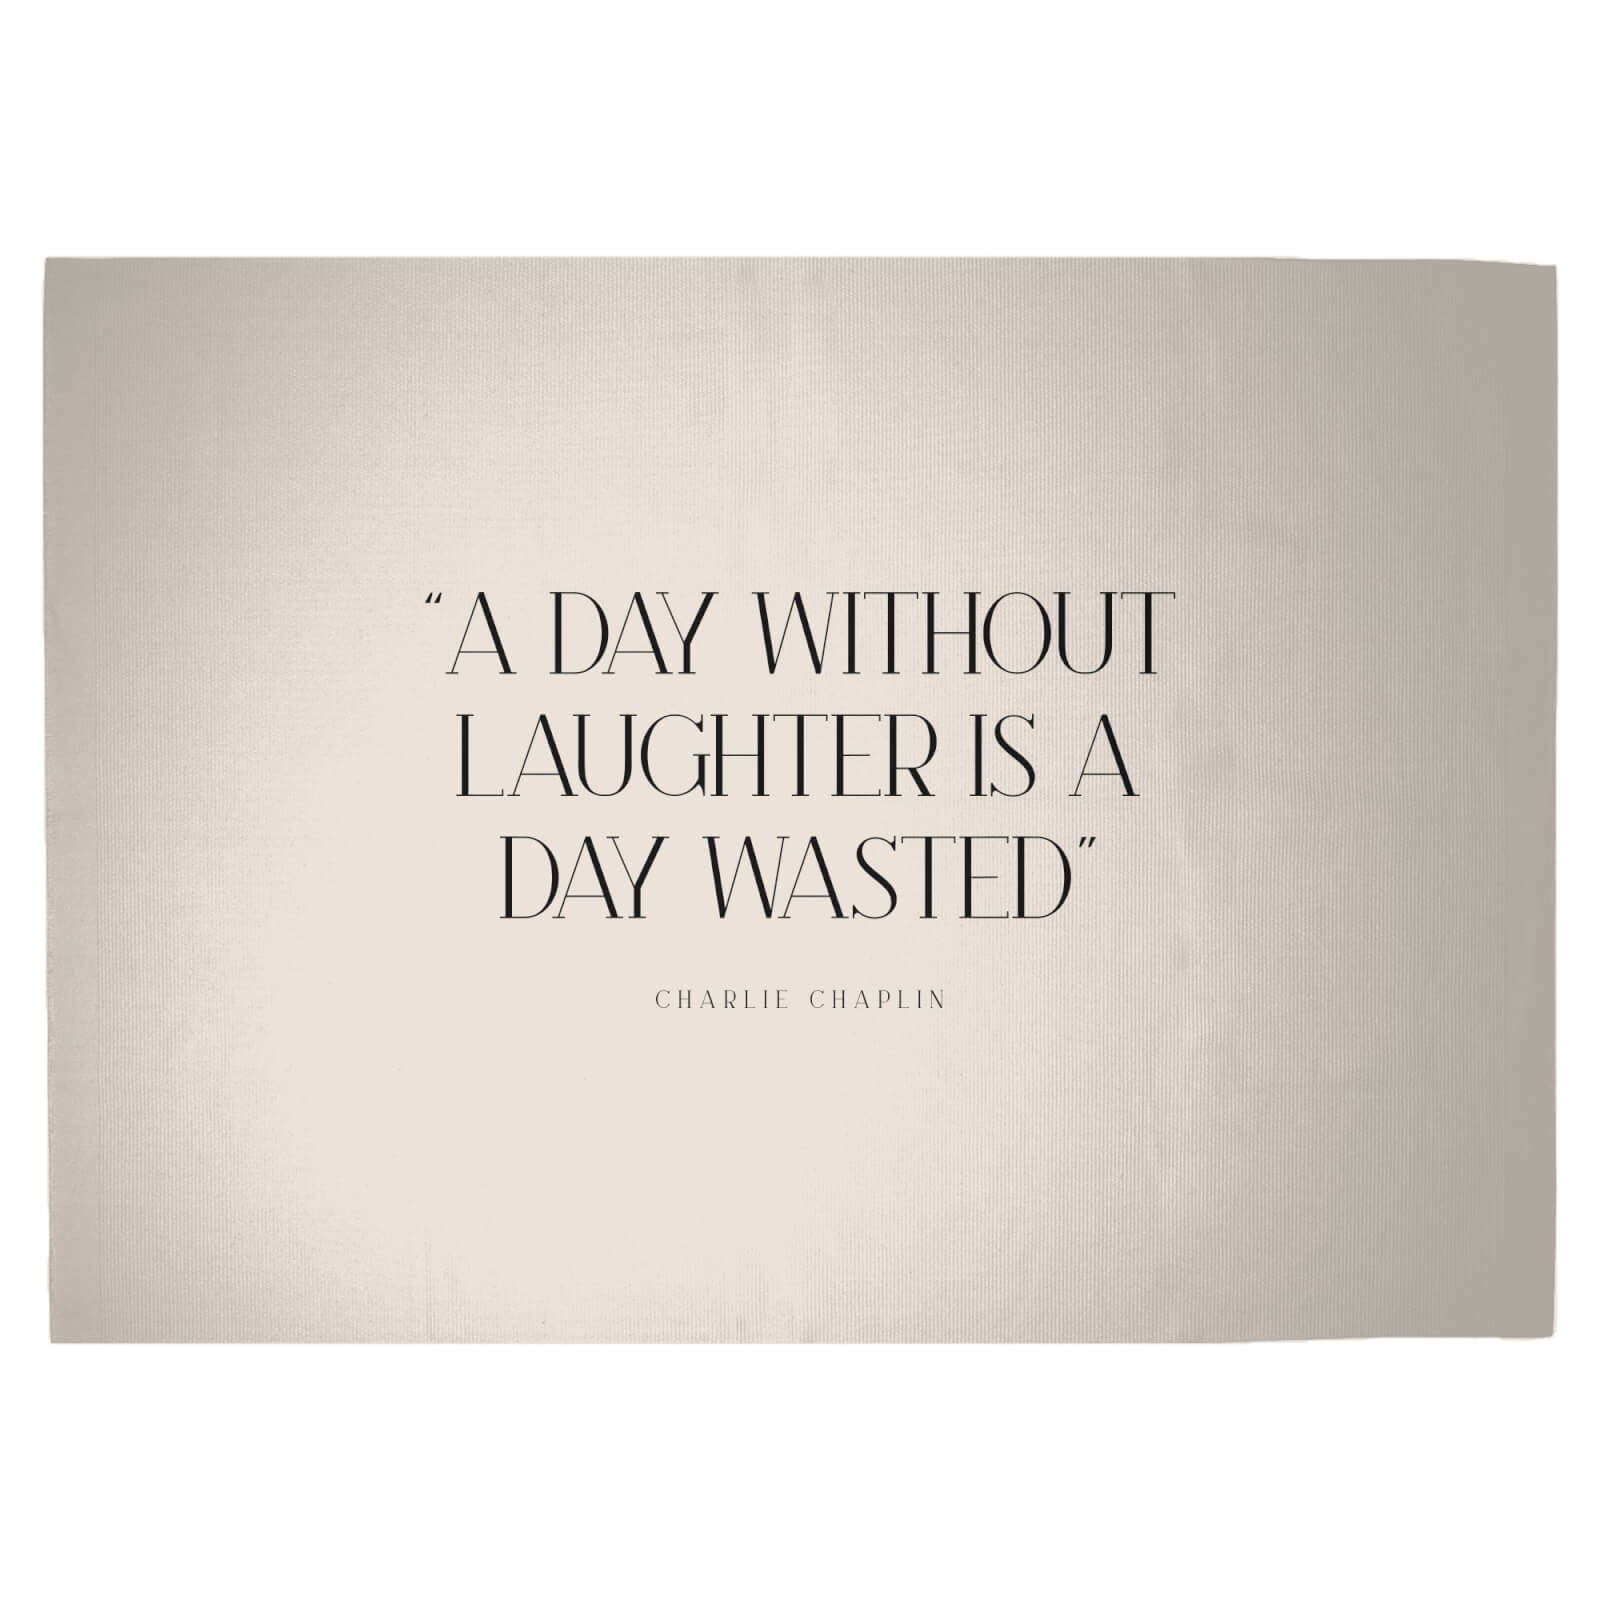 A Day Without Laughter Is A Day Wasted Woven Rug - Large